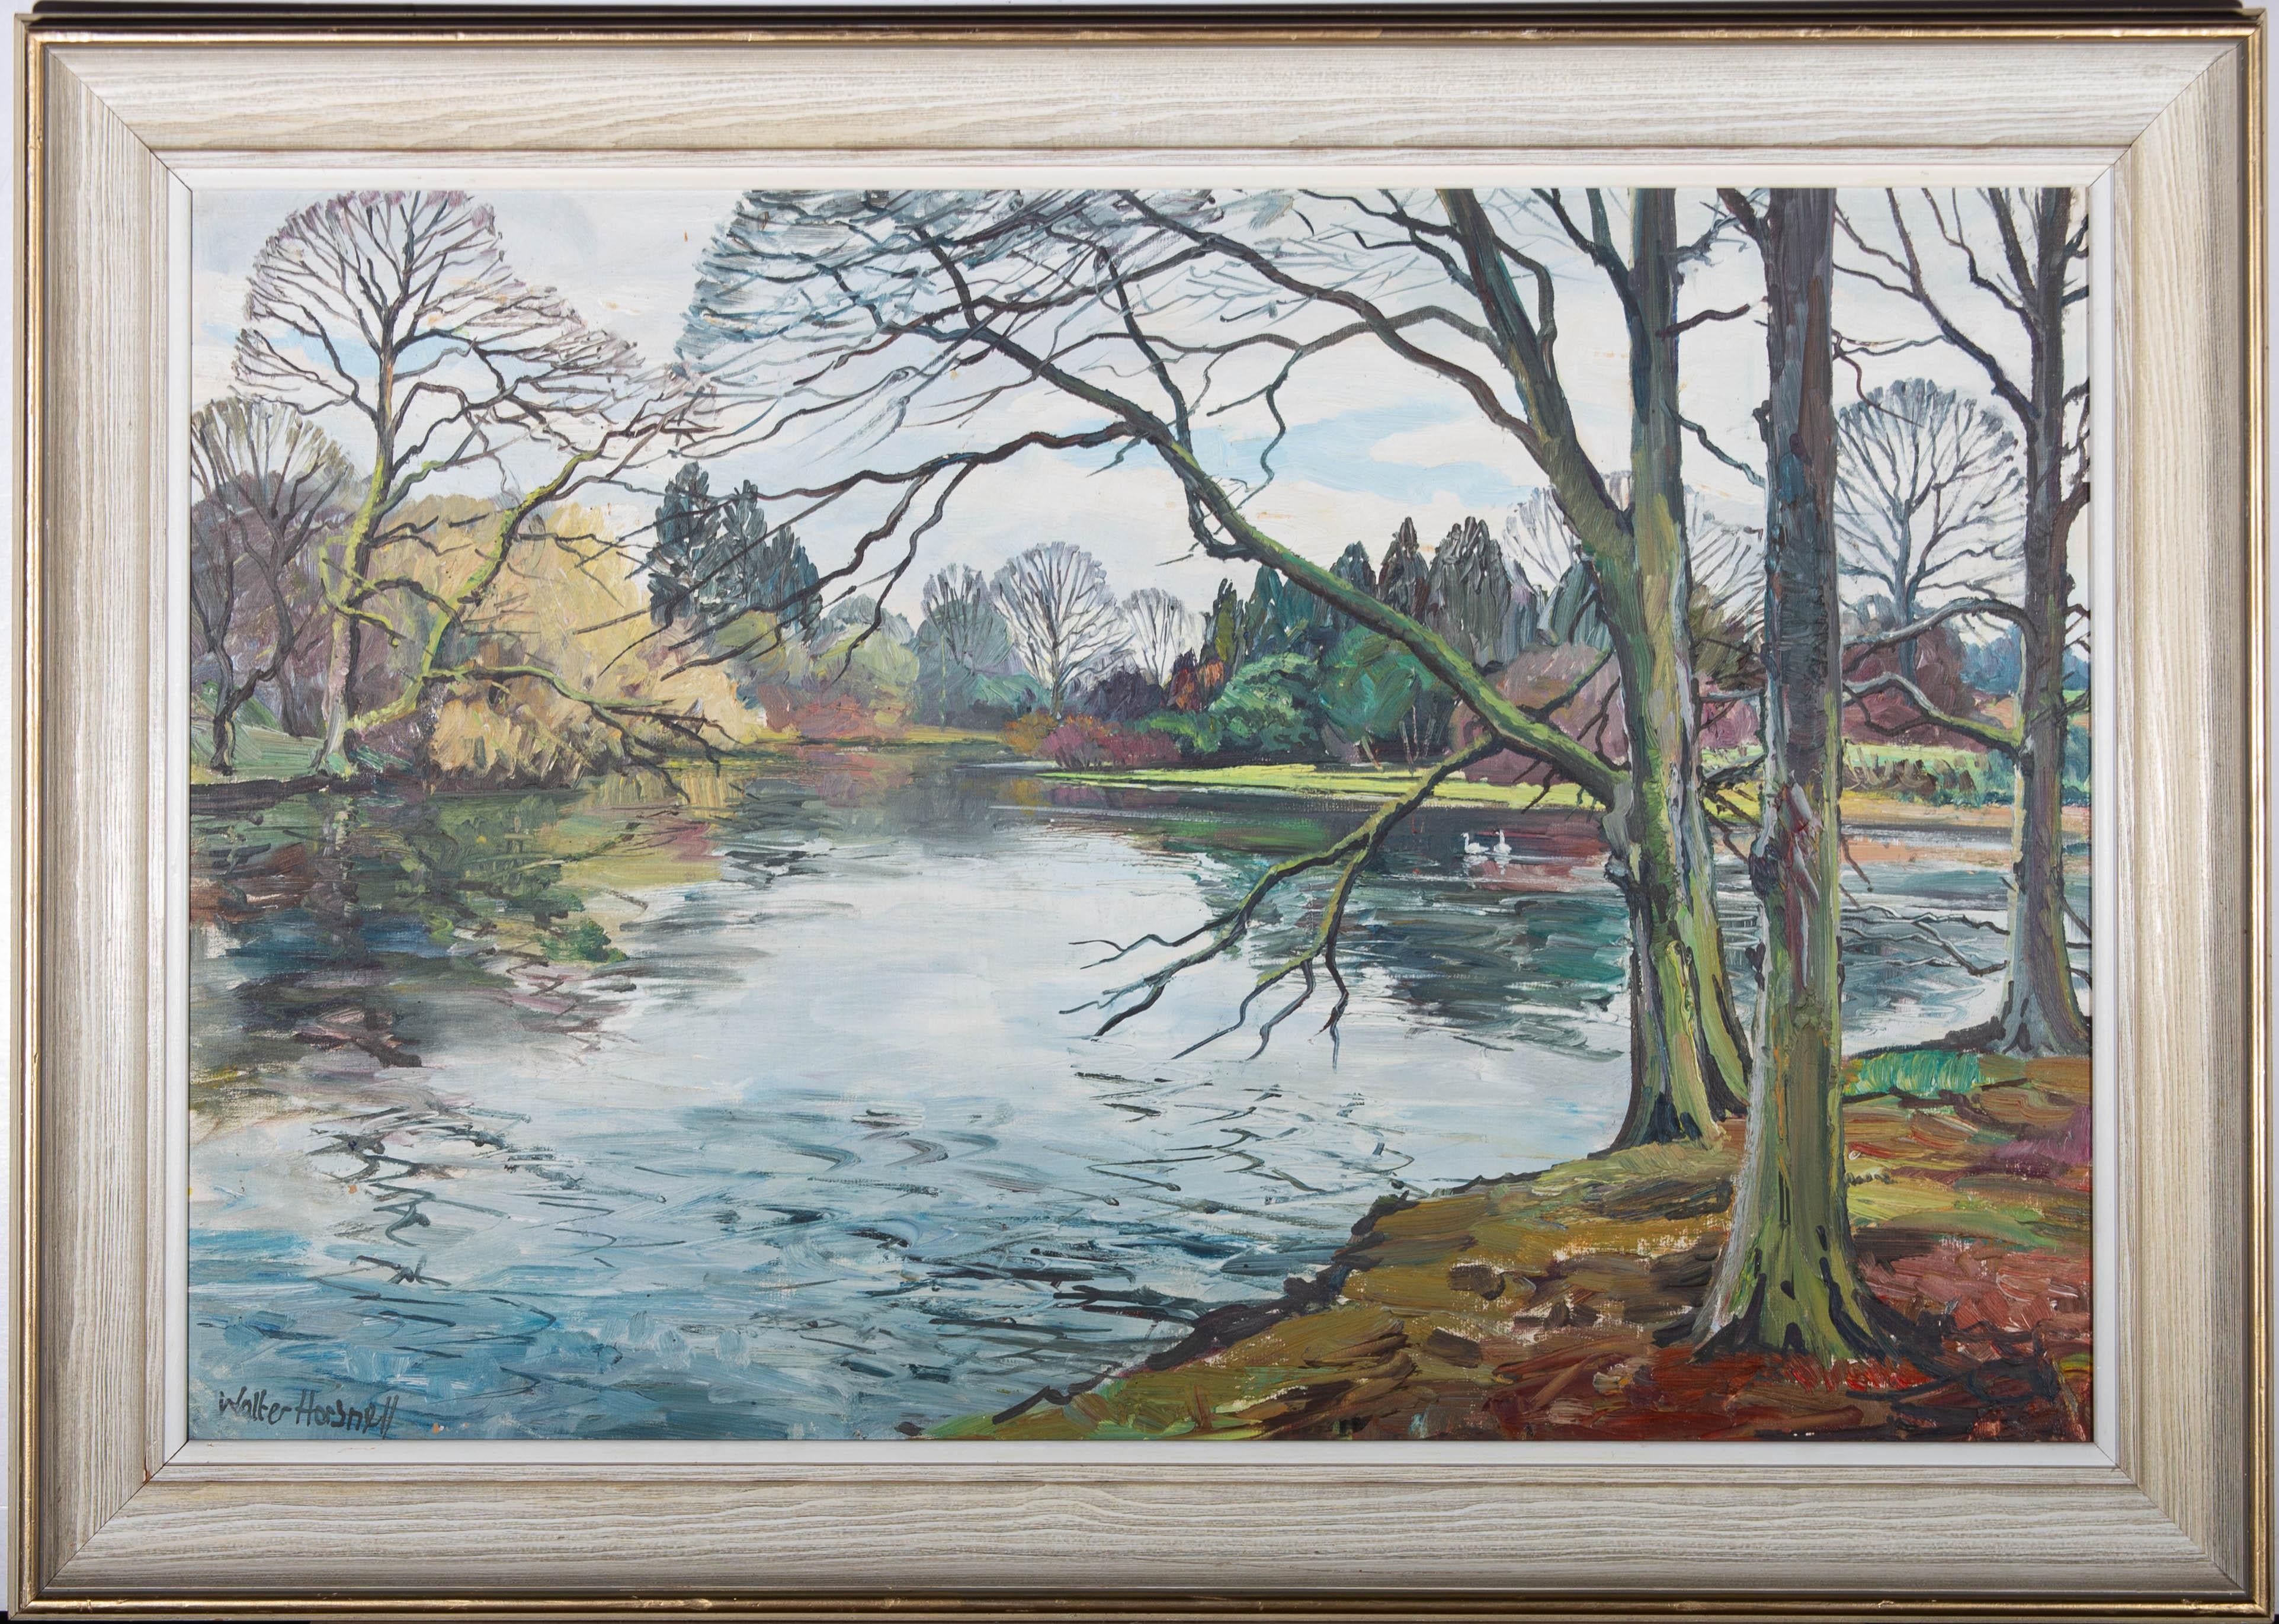 A fine 20th Century oil landscape in an expressive impressionistic style with flashes of vibrant colour. The scene shows a glassy lake in beautiful parkland with the bank lined with trees. The stark branches of the bare trees are reflected in the